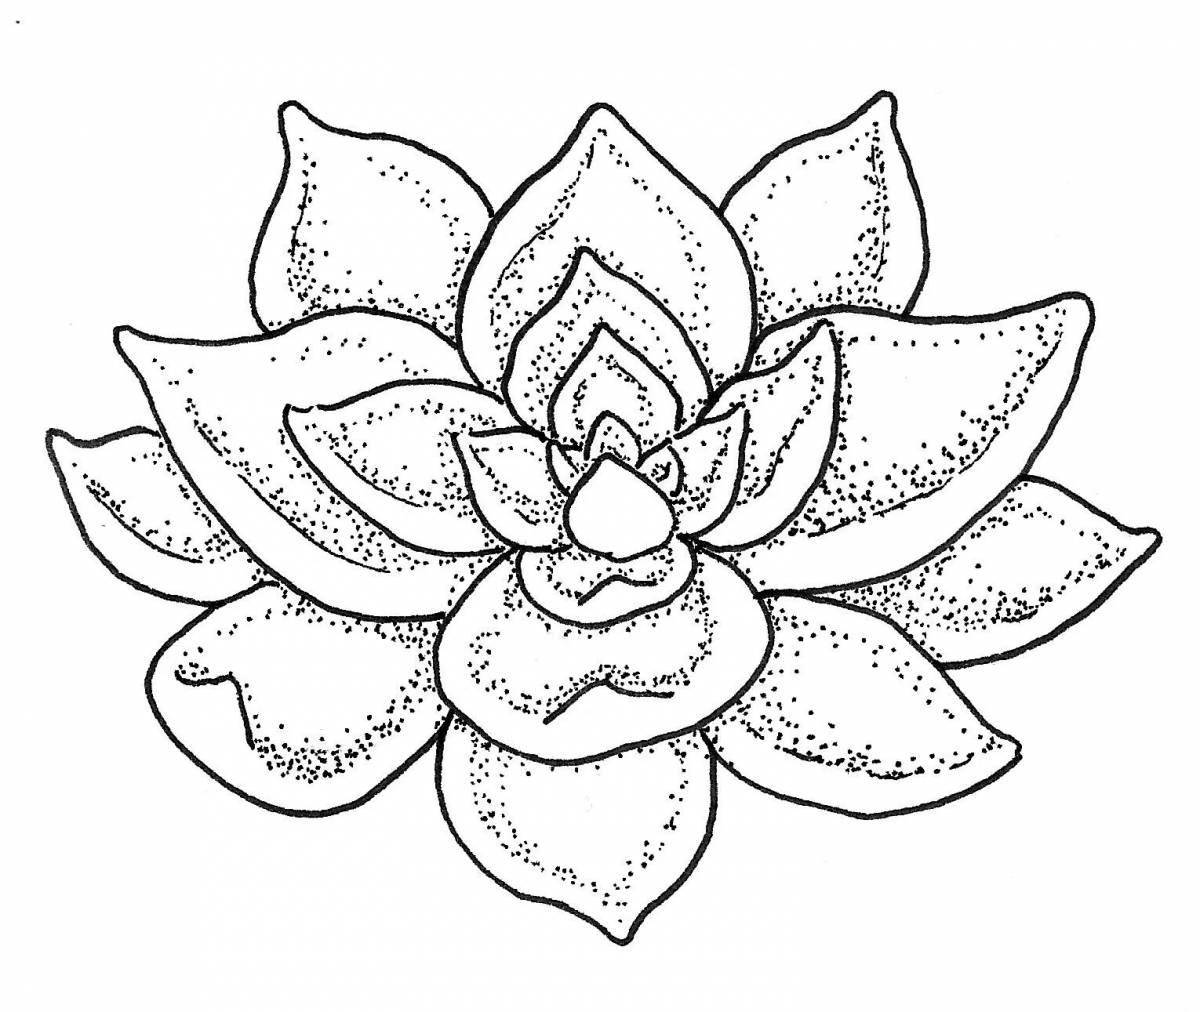 Fun coloring pages of succulents